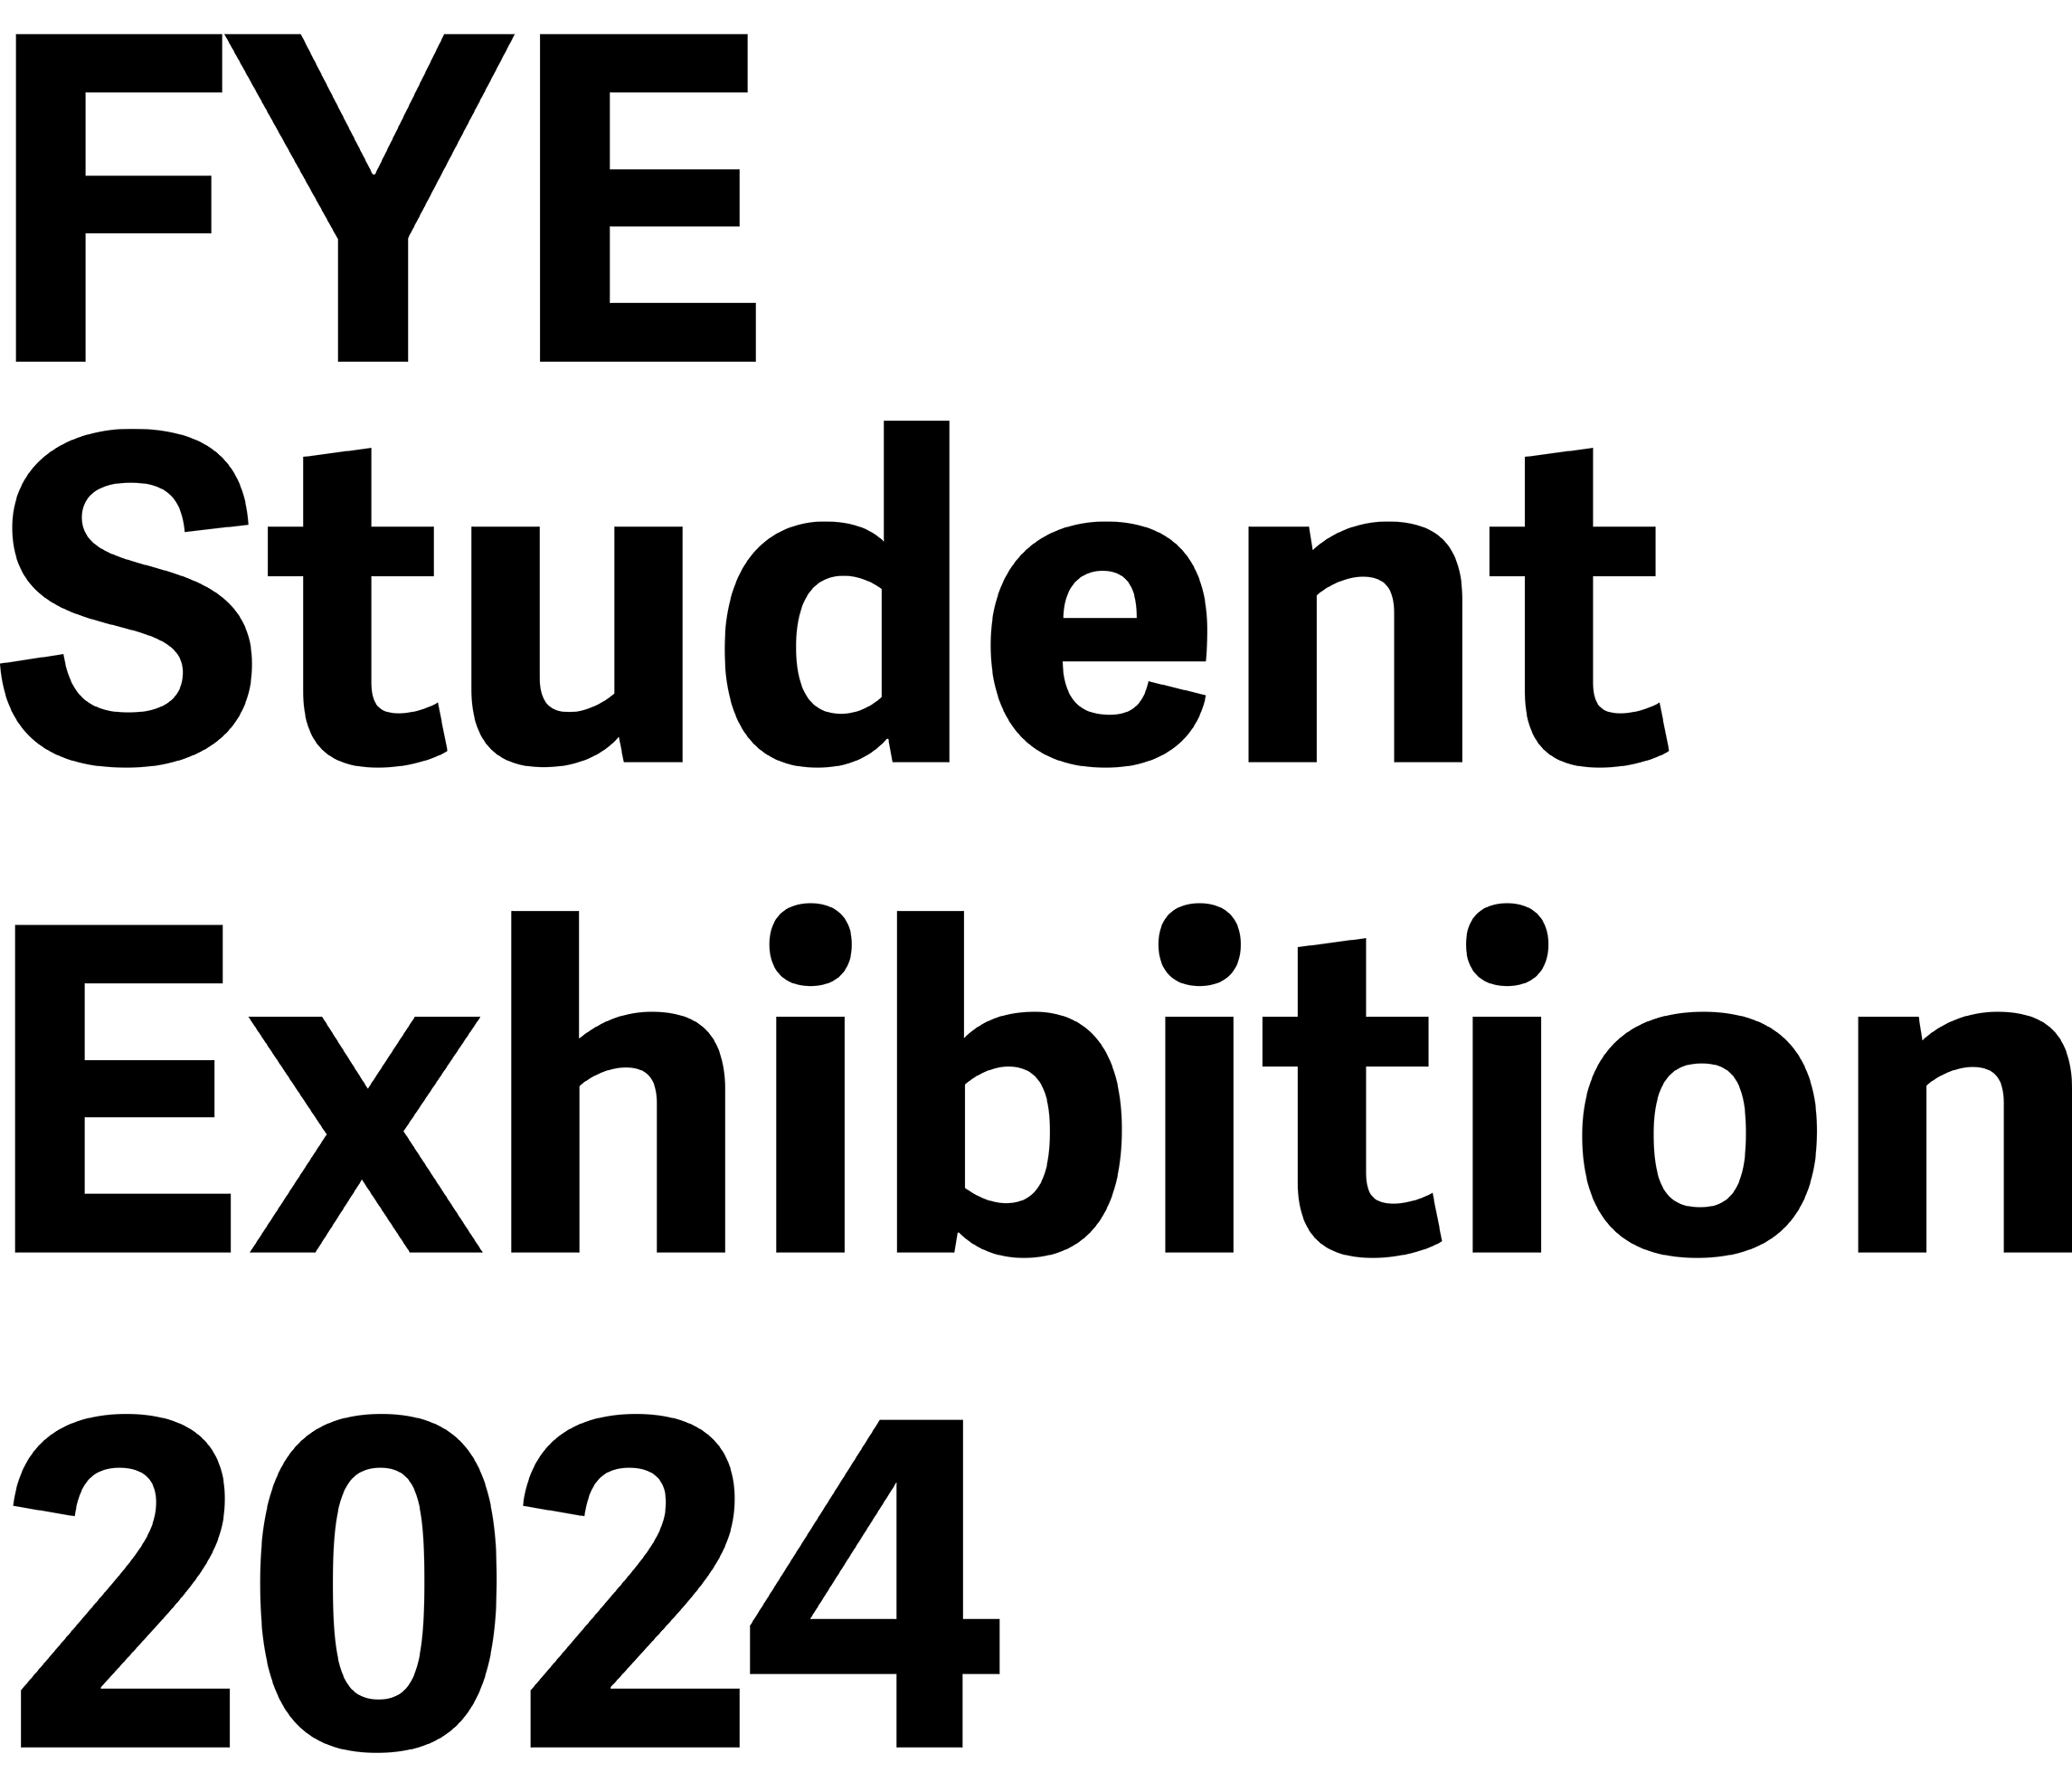 FYE Student Exhibition Opening Reception March 29